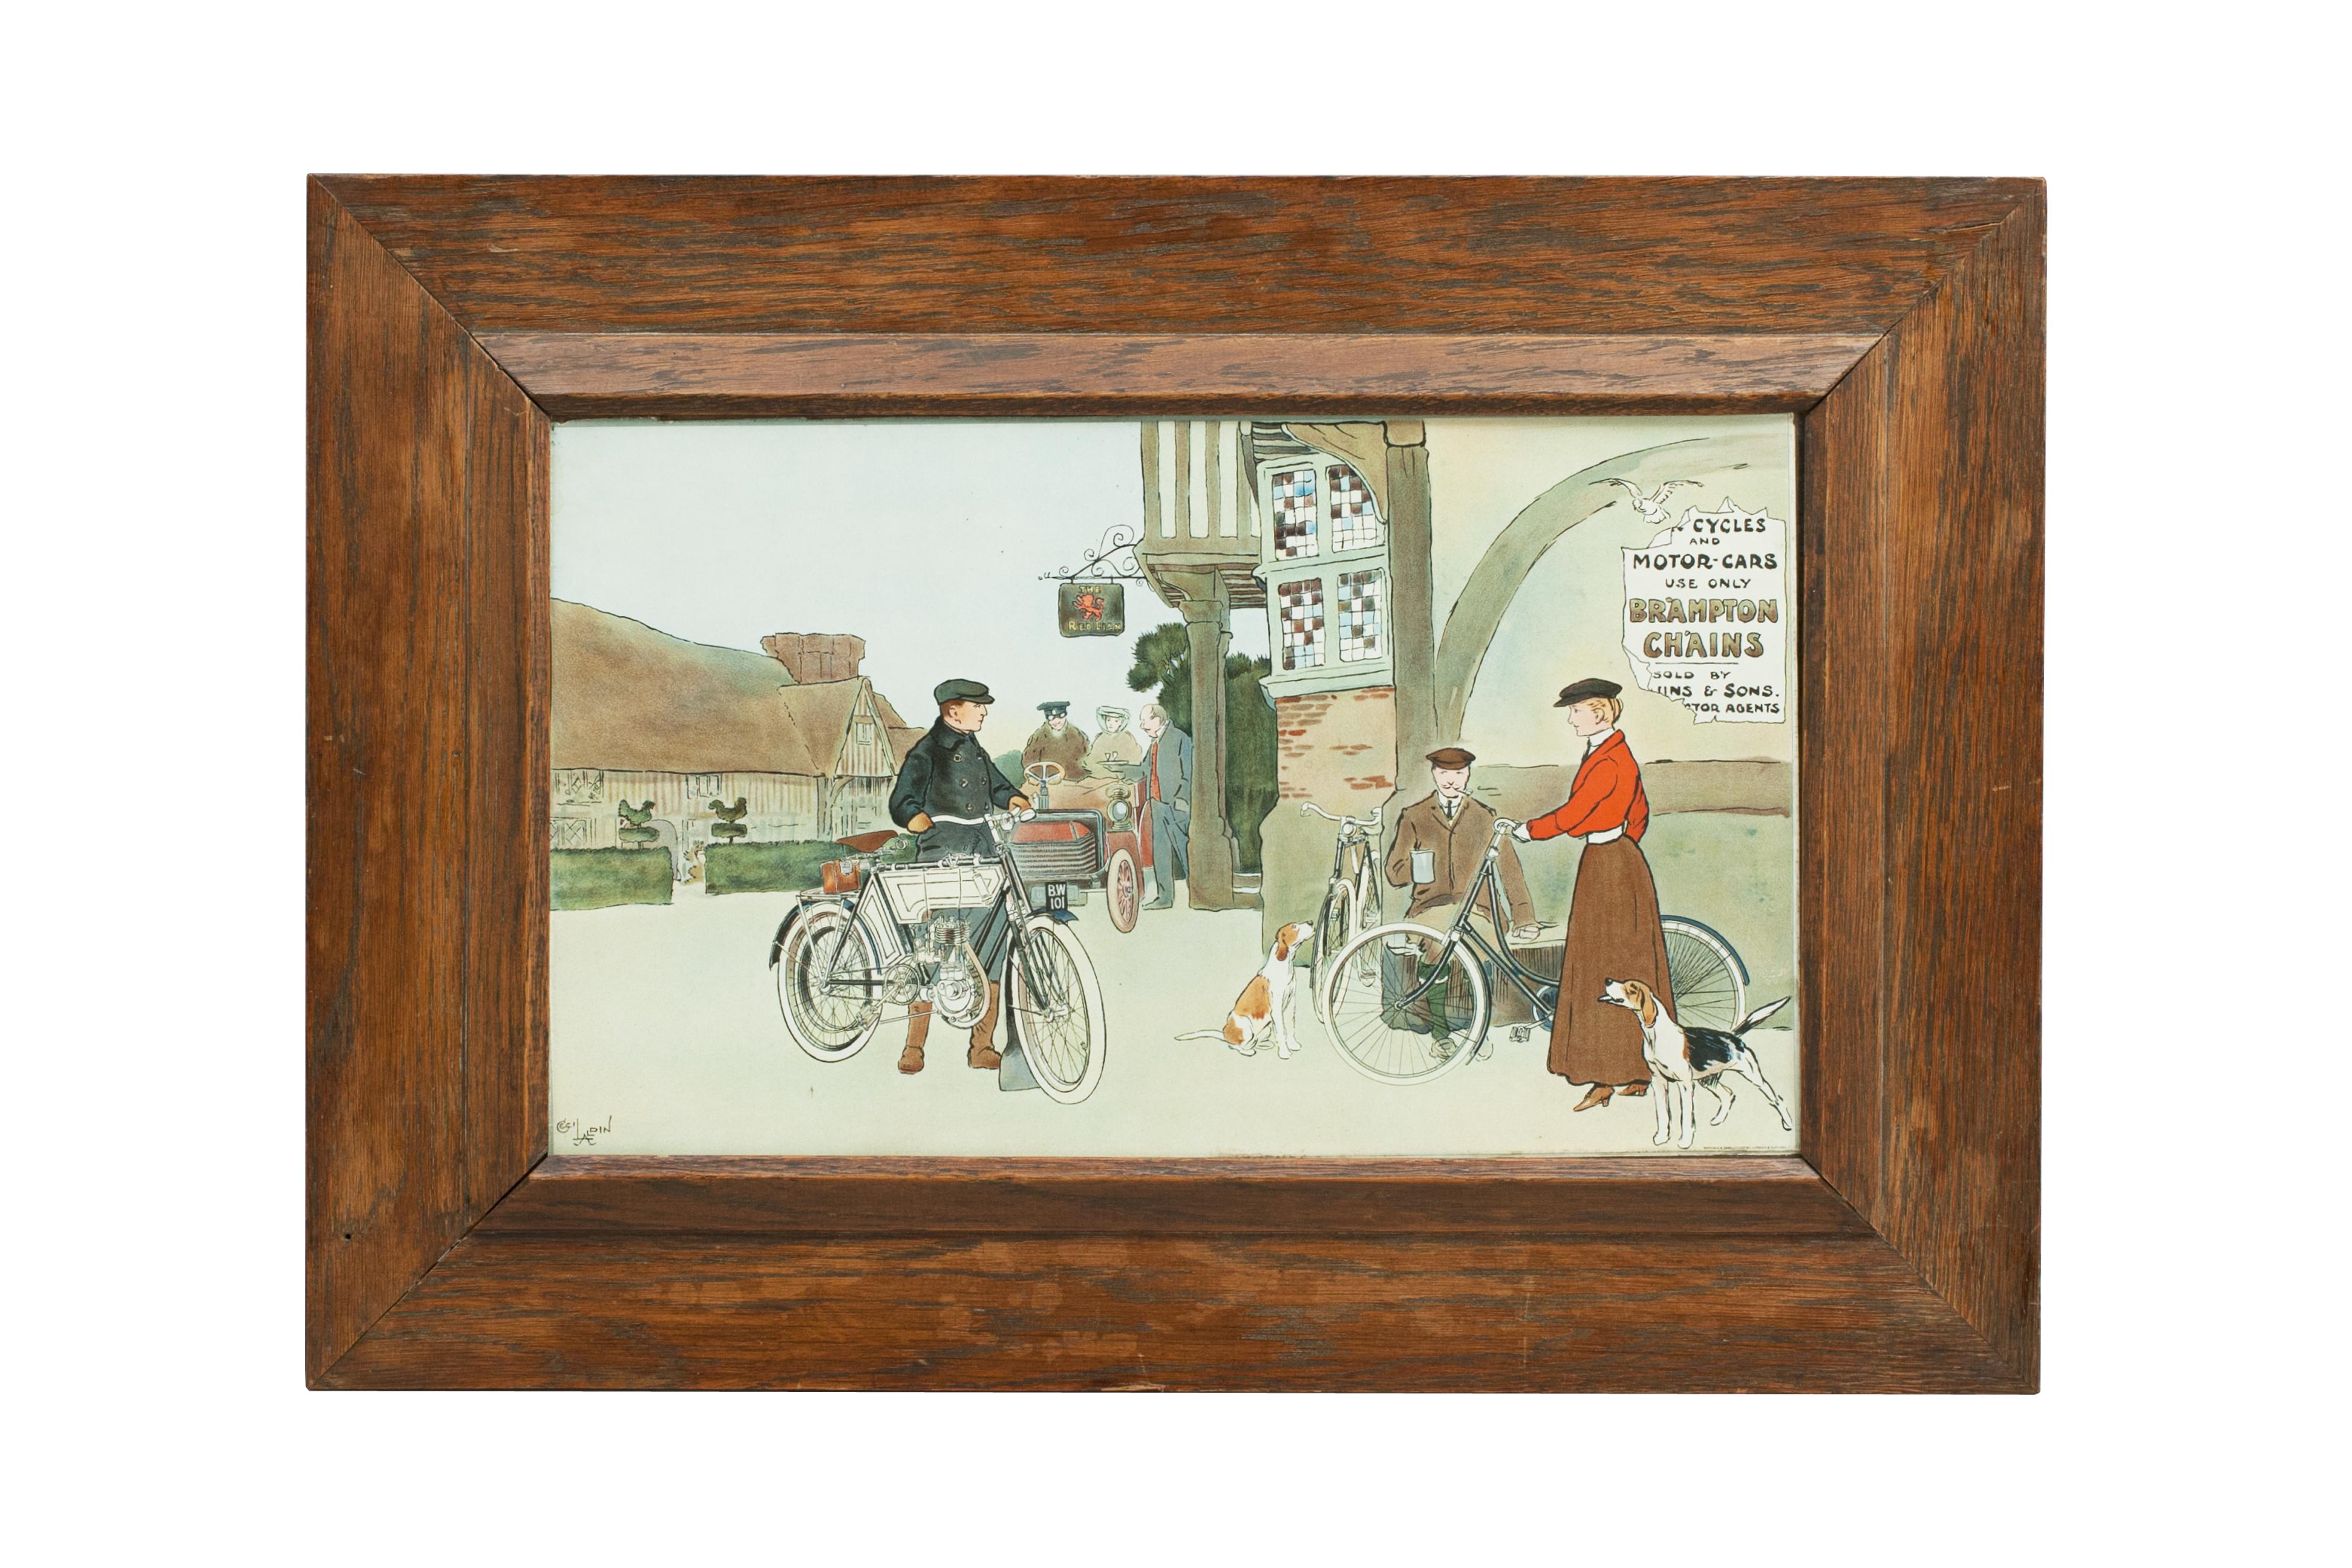 Bramptons chains Motoring print by Cecil Aldin
A very rare colorful motoring chromolithographic print after Cecil Aldin. The scene depicts a lady & gent with bicycles talking to a gentleman with motor cycle. In the background there is a couple in a